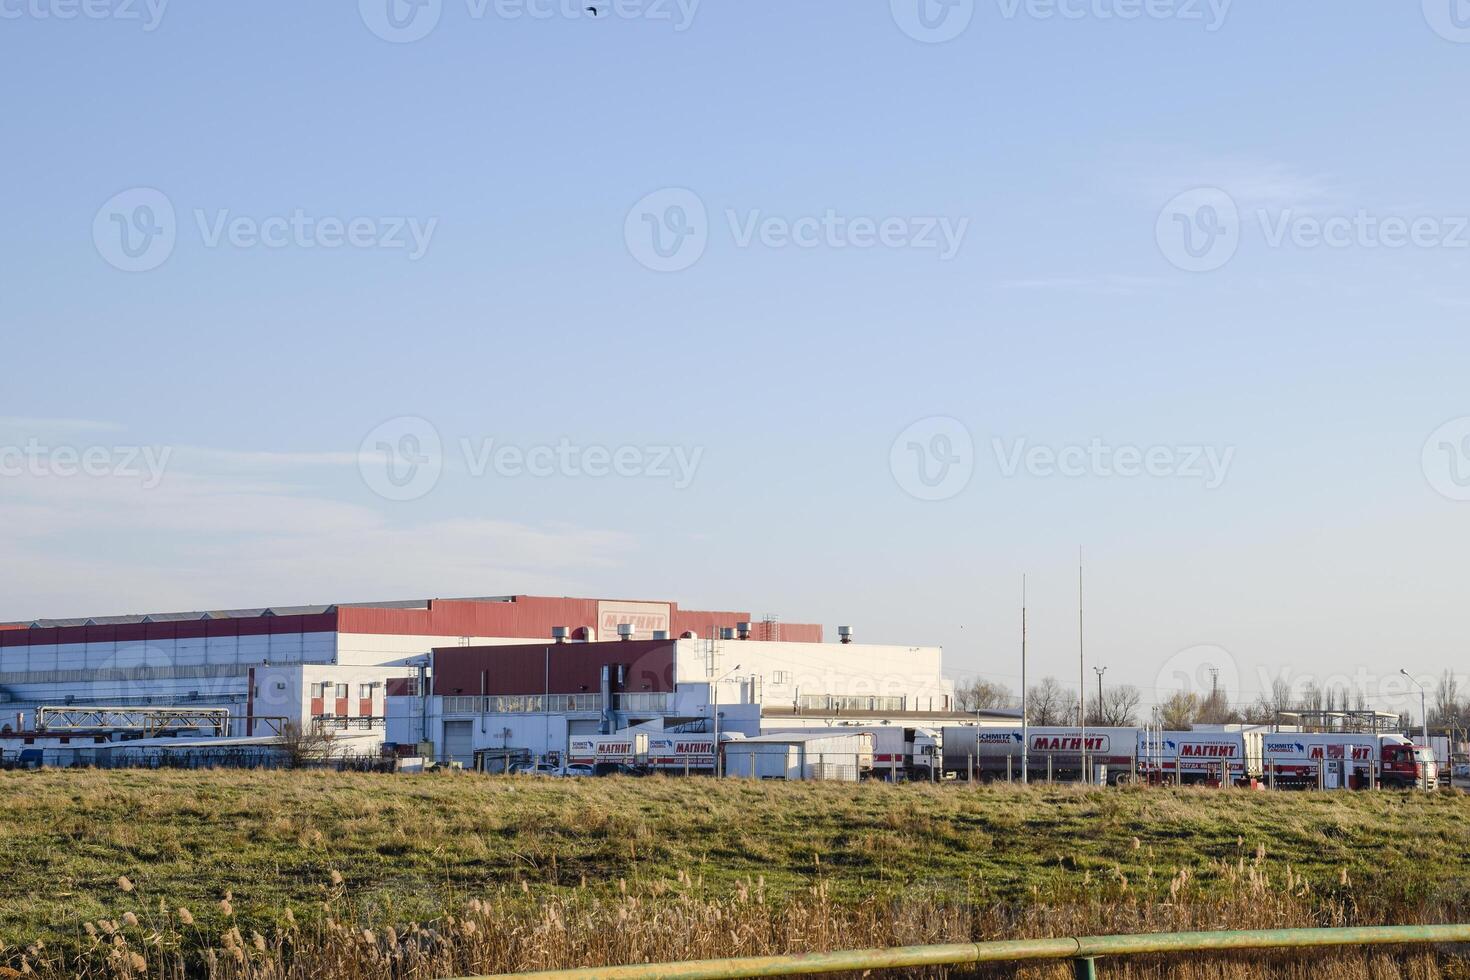 The main distribution center of goods is a network of magnets in the Slavic region. Thunder, the main view. The supermarket chain is a magnet. photo